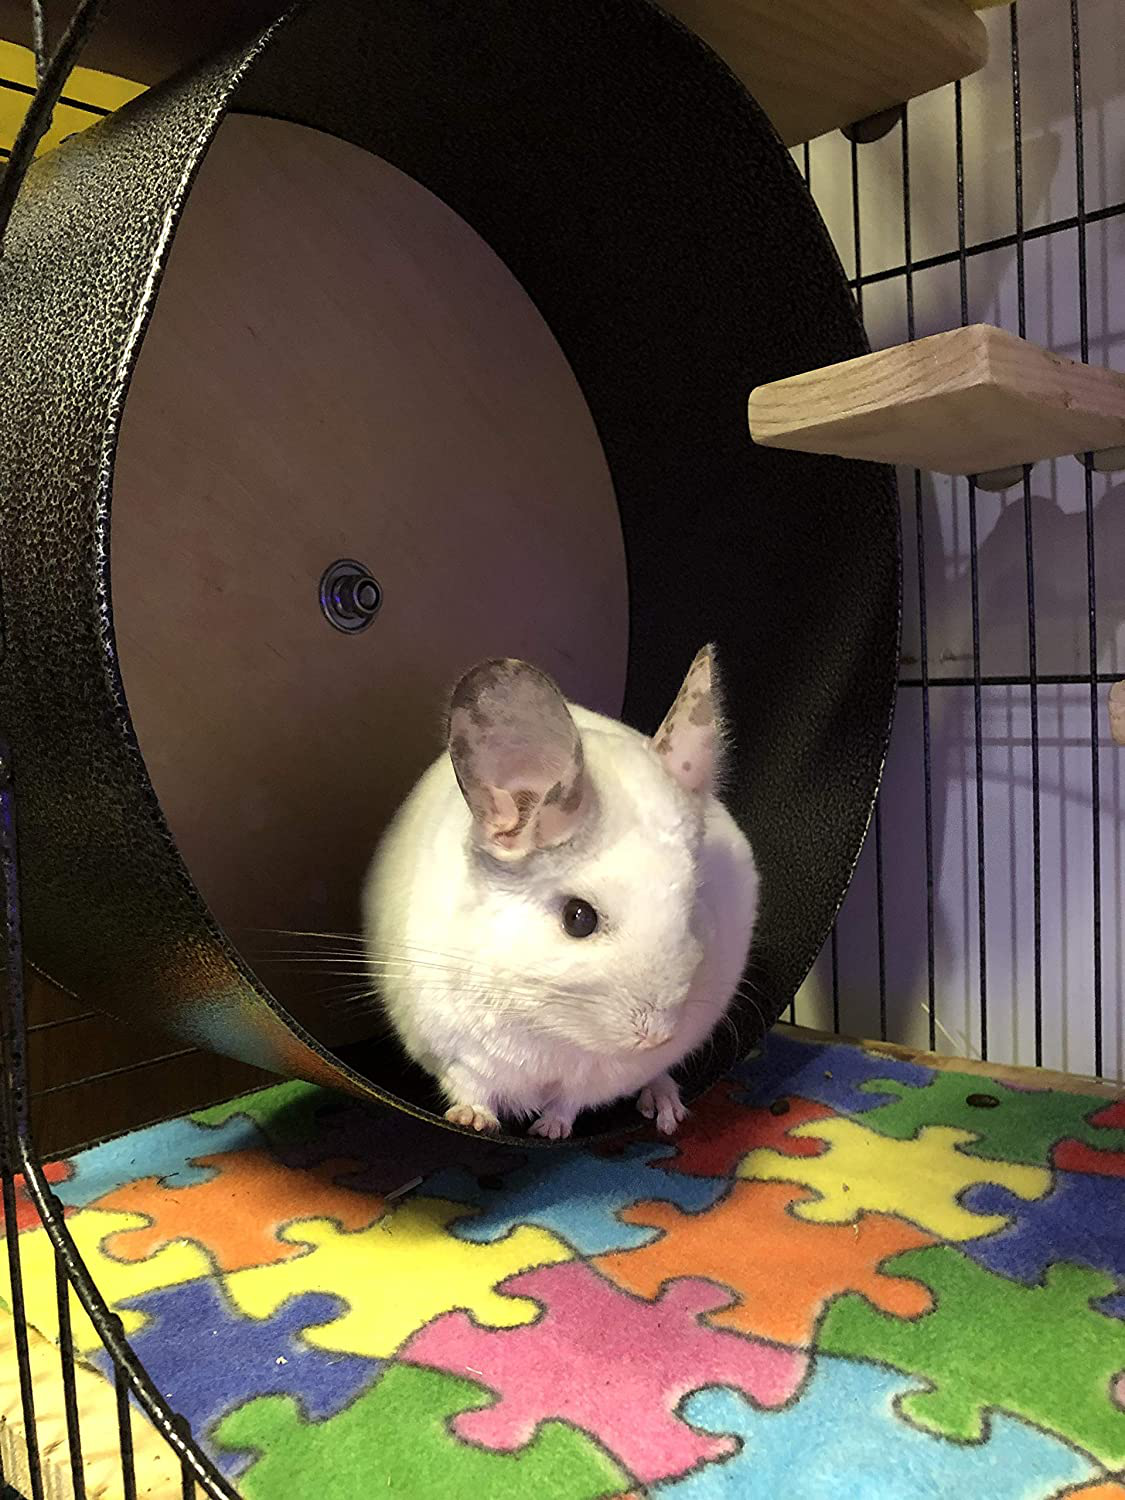 Can I use gorilla wood glue for my chinchillas wheel that's broken? It says  non toxic but i'd rather be safe and make sure : r/chinchilla